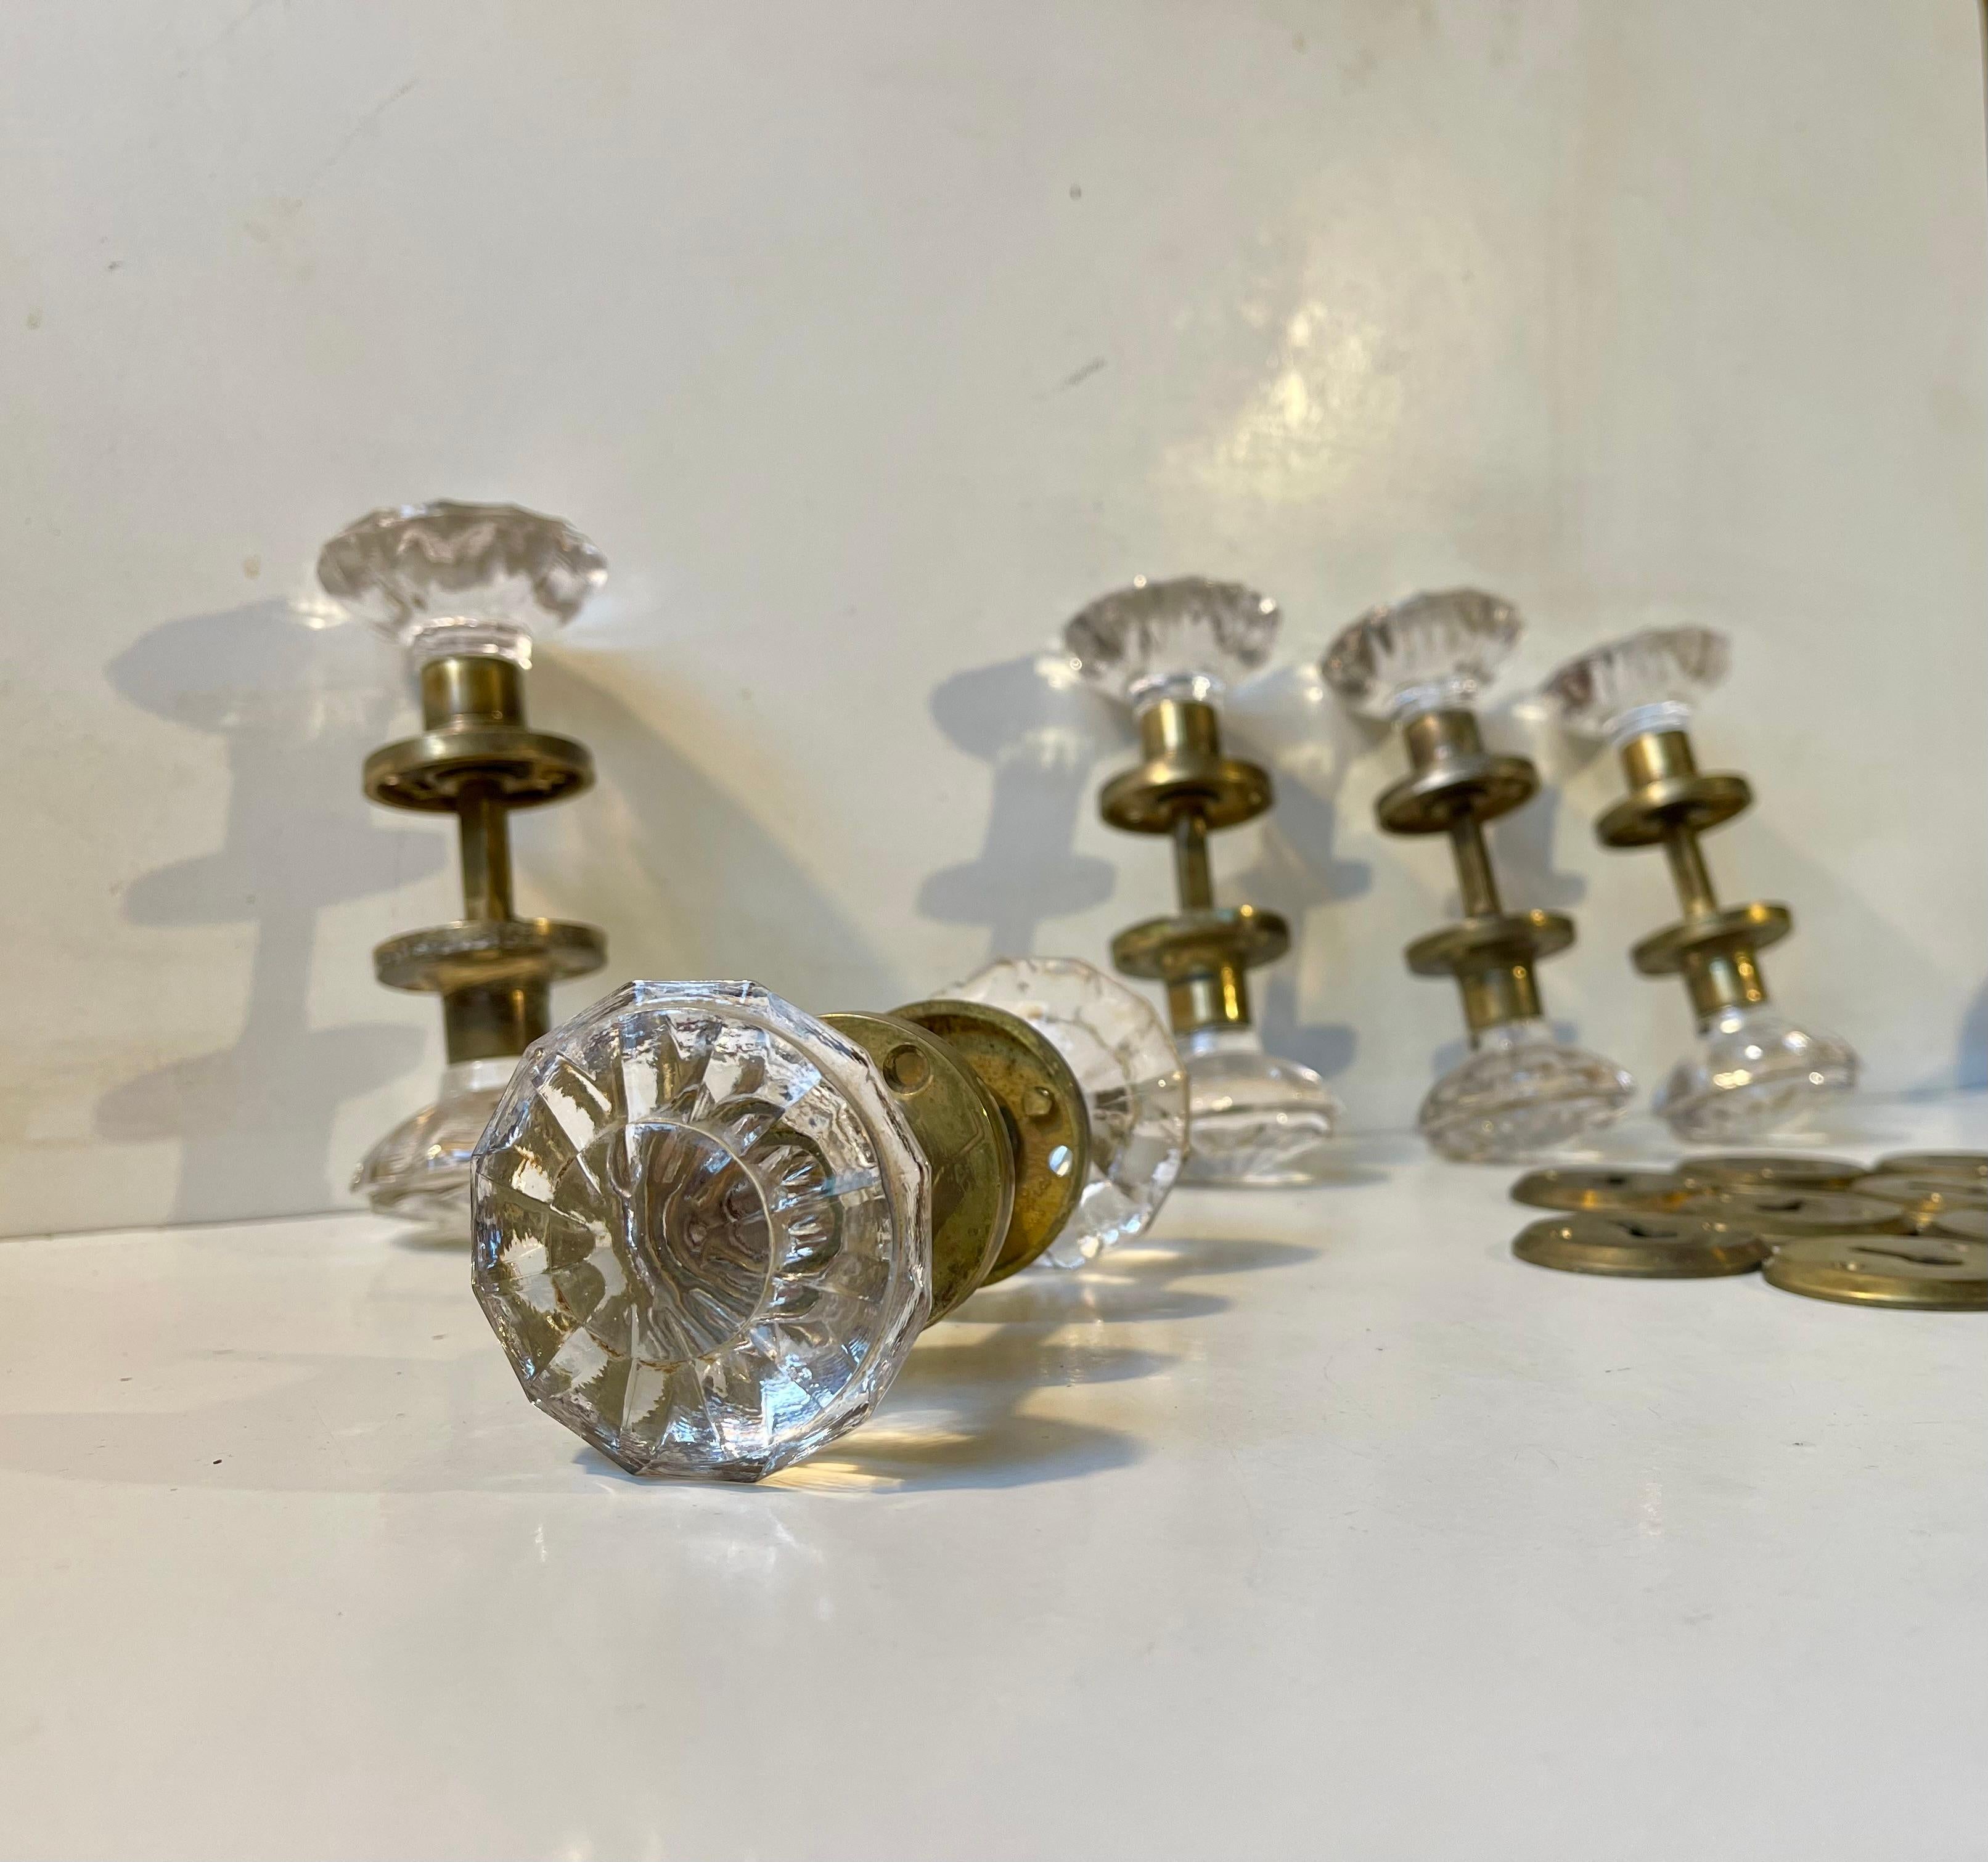 A rare set of Swedish door handles / doorknob set by the company Verrina Sweden. Made during the 1970s in the style Art Deco Revival - Midcentury Modern Hotel Lounge and indeed suitable for Hollywood Regency interiors.  The set consists of 10 door